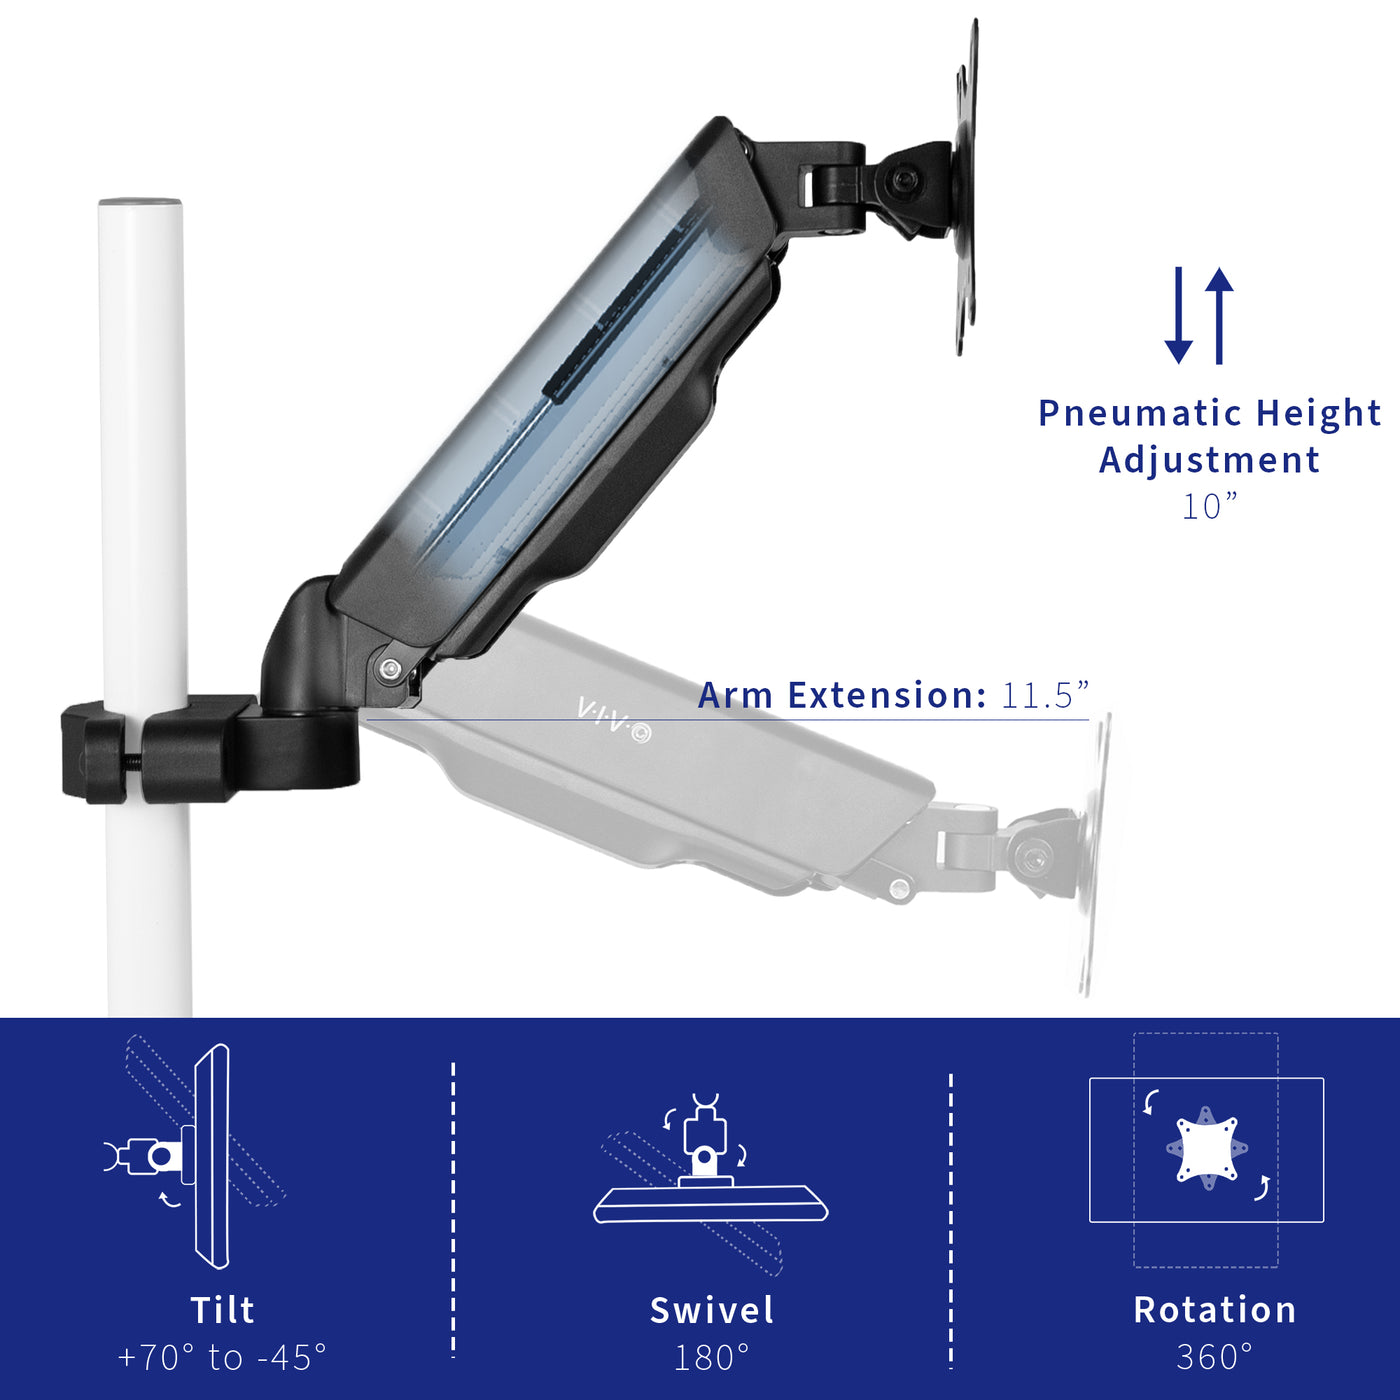 Height adjustments are made easy with a sturdy pneumatic arm including tilt, rotation, and swivel.